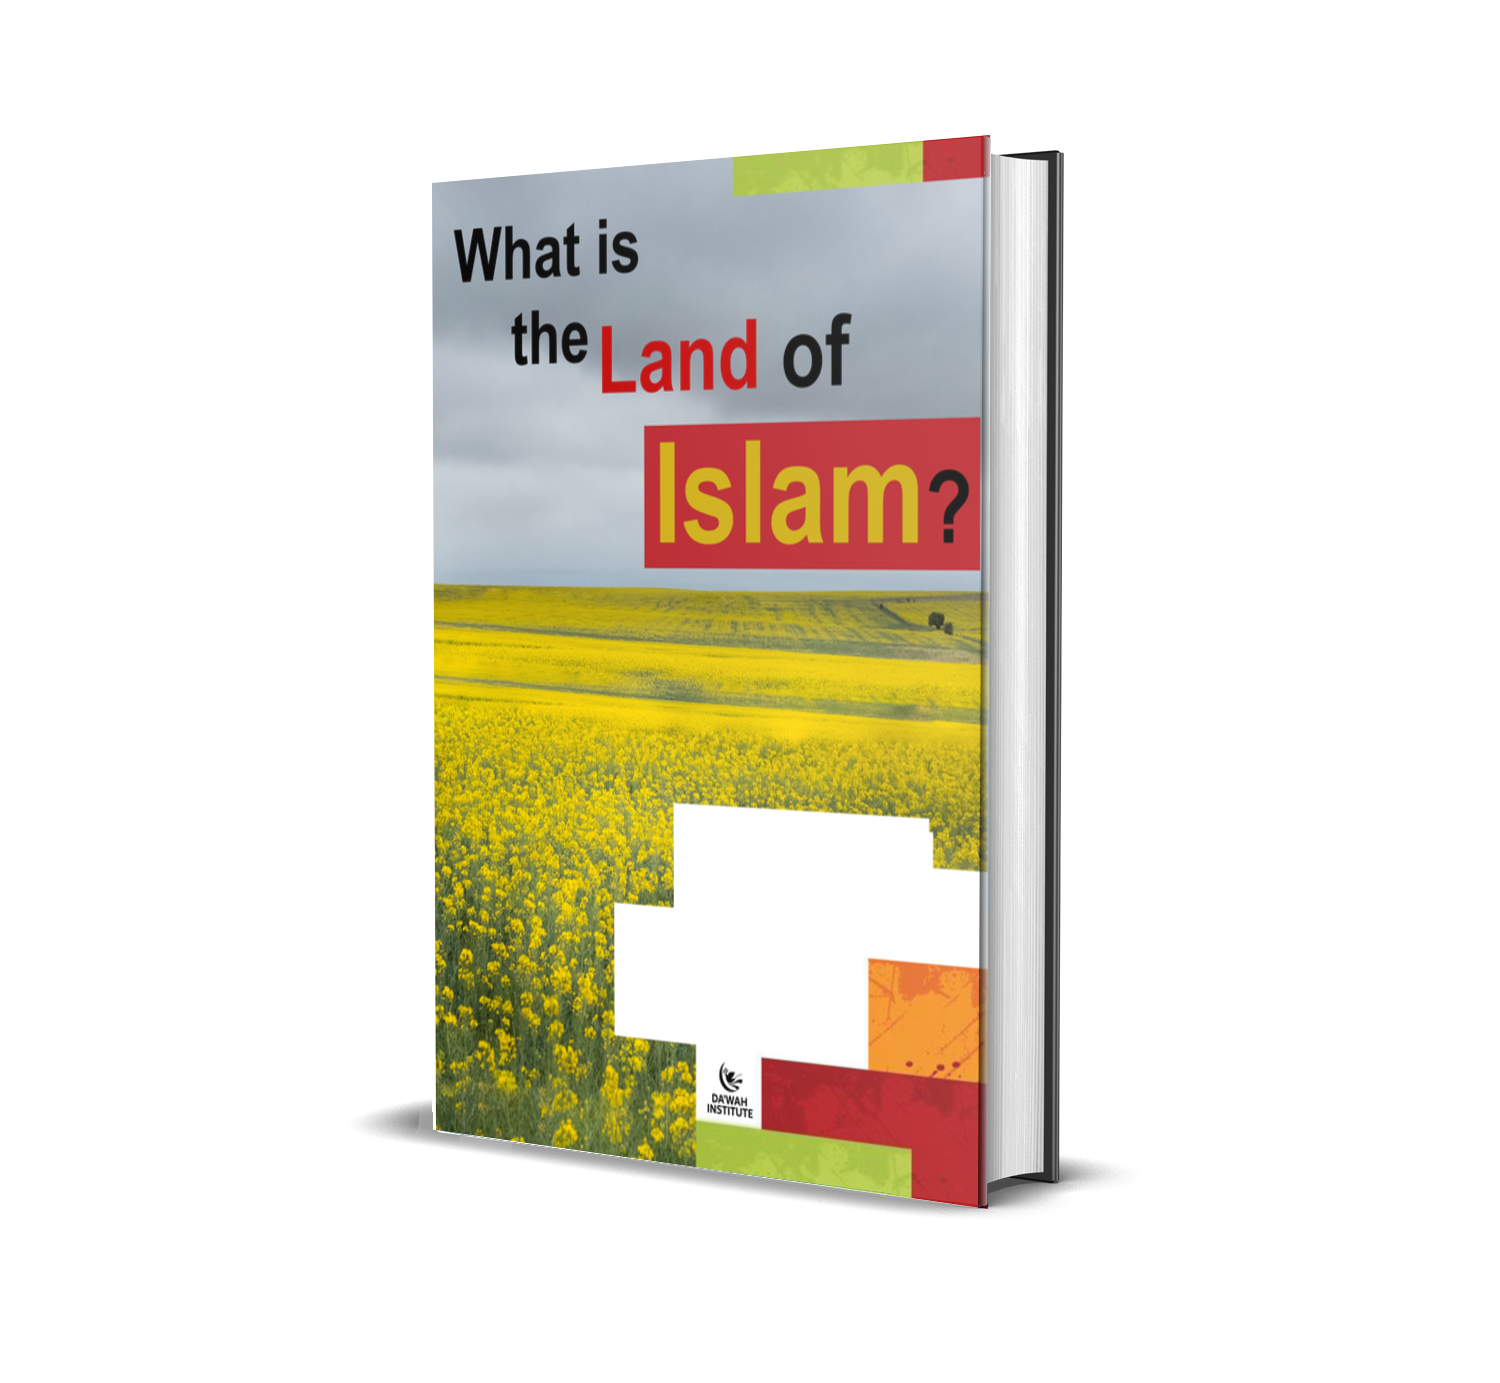 https://dawahinstitute.org/wp-content/uploads/What-is-the-Land-of-Islam.png